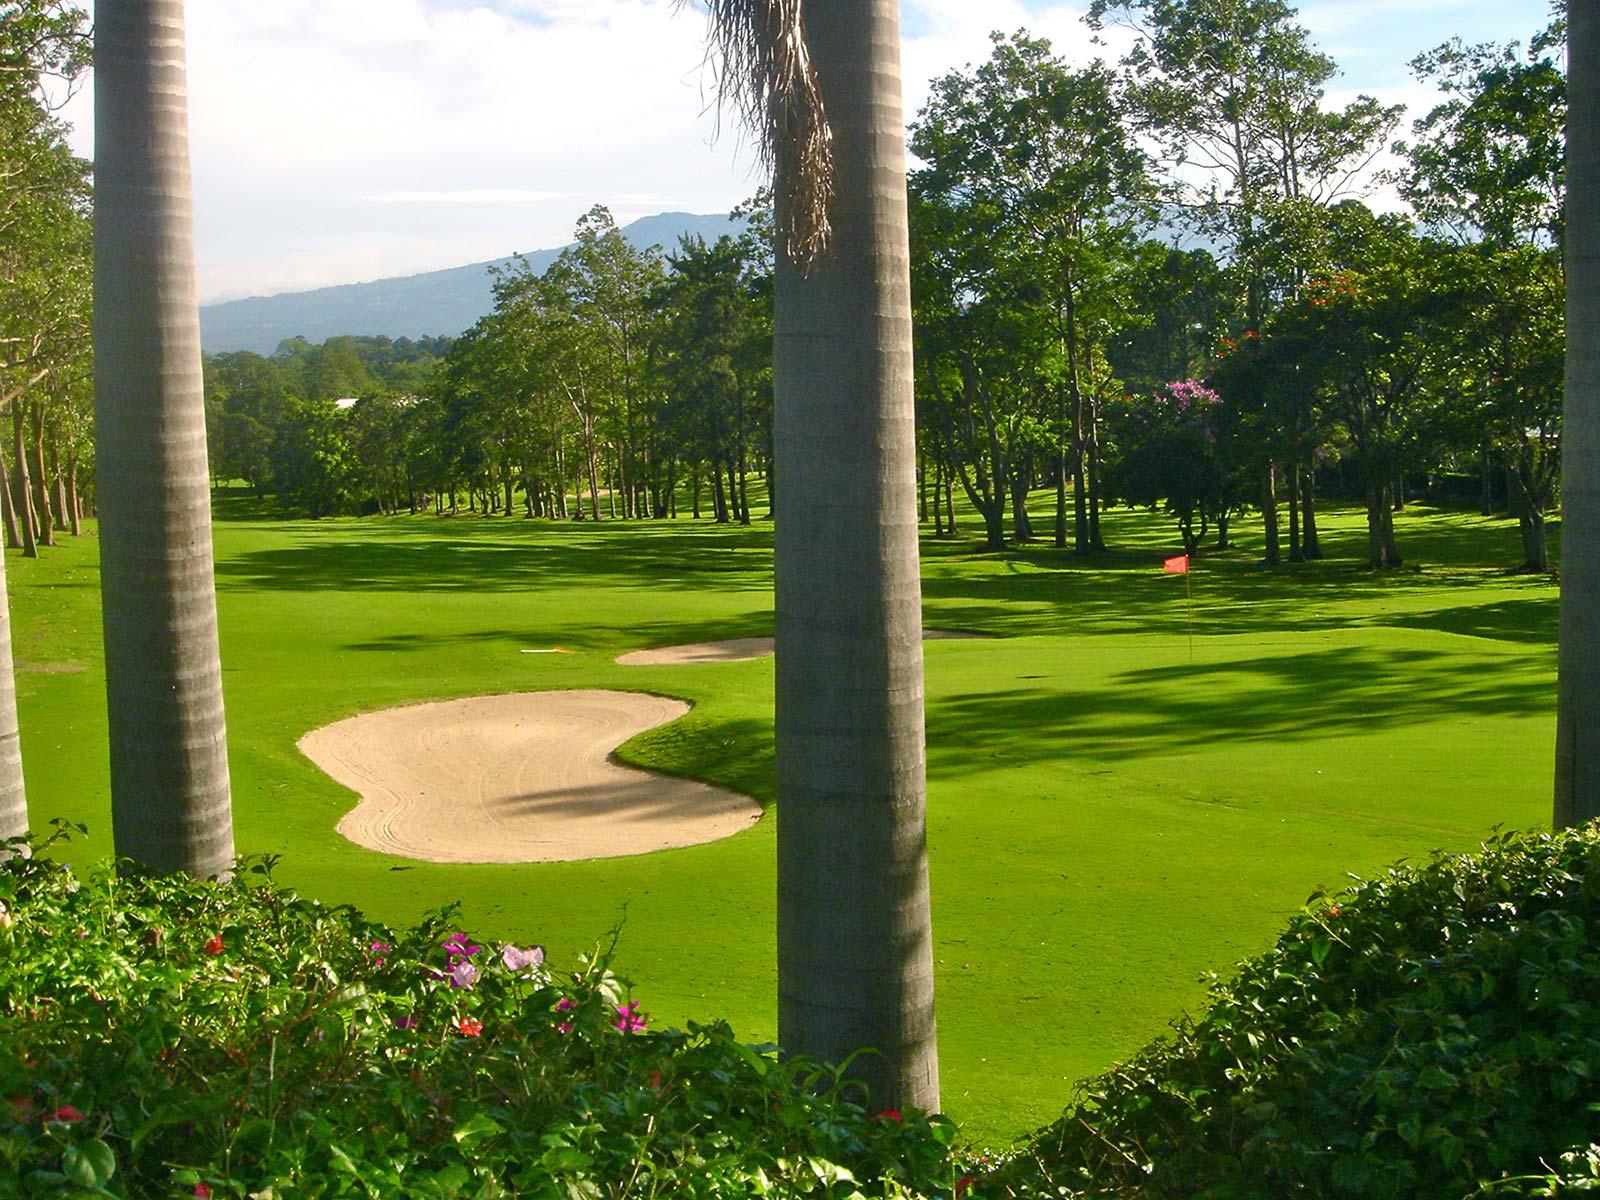 Costa Rica, Real Estate, Golf front, Home for sale, private pool, guest house, 7 bedrooms, 6 bathrooms, Cariari Golf Course, estate, golf properties, 9th hole view